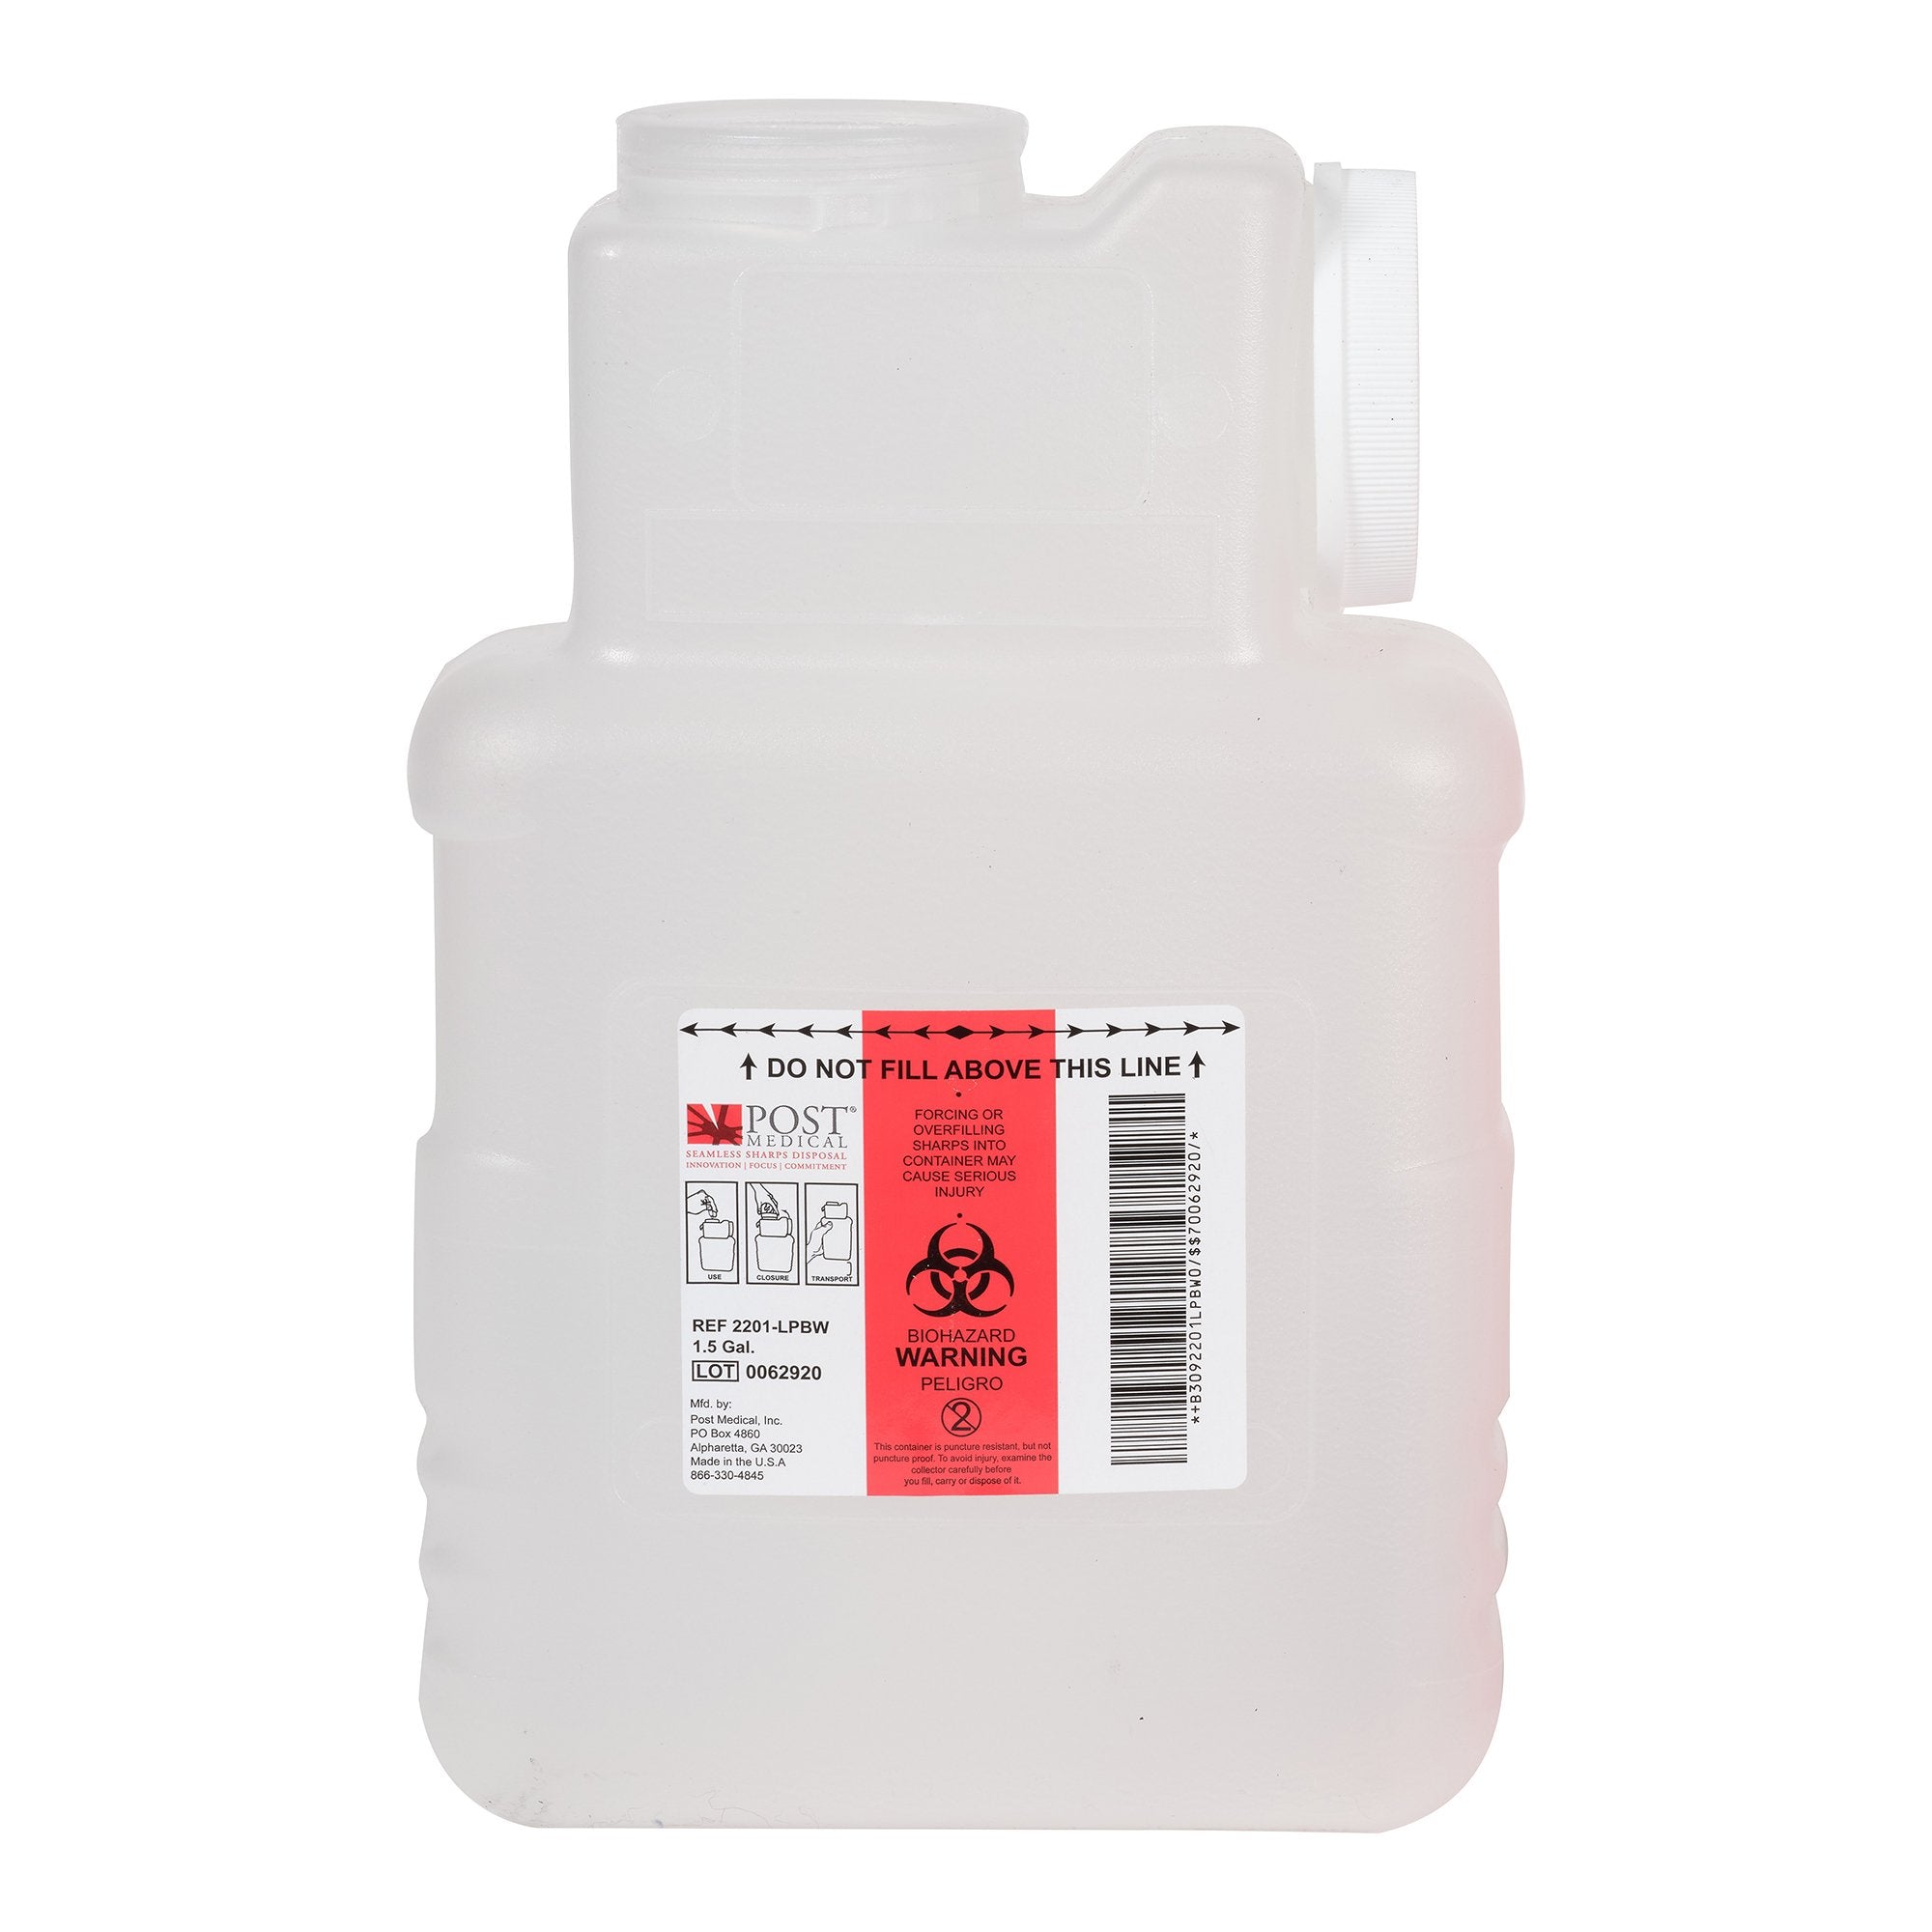 Sharps Container Leaktight Translucent Base Horizontal / Vertical Entry 1.5 Gallon